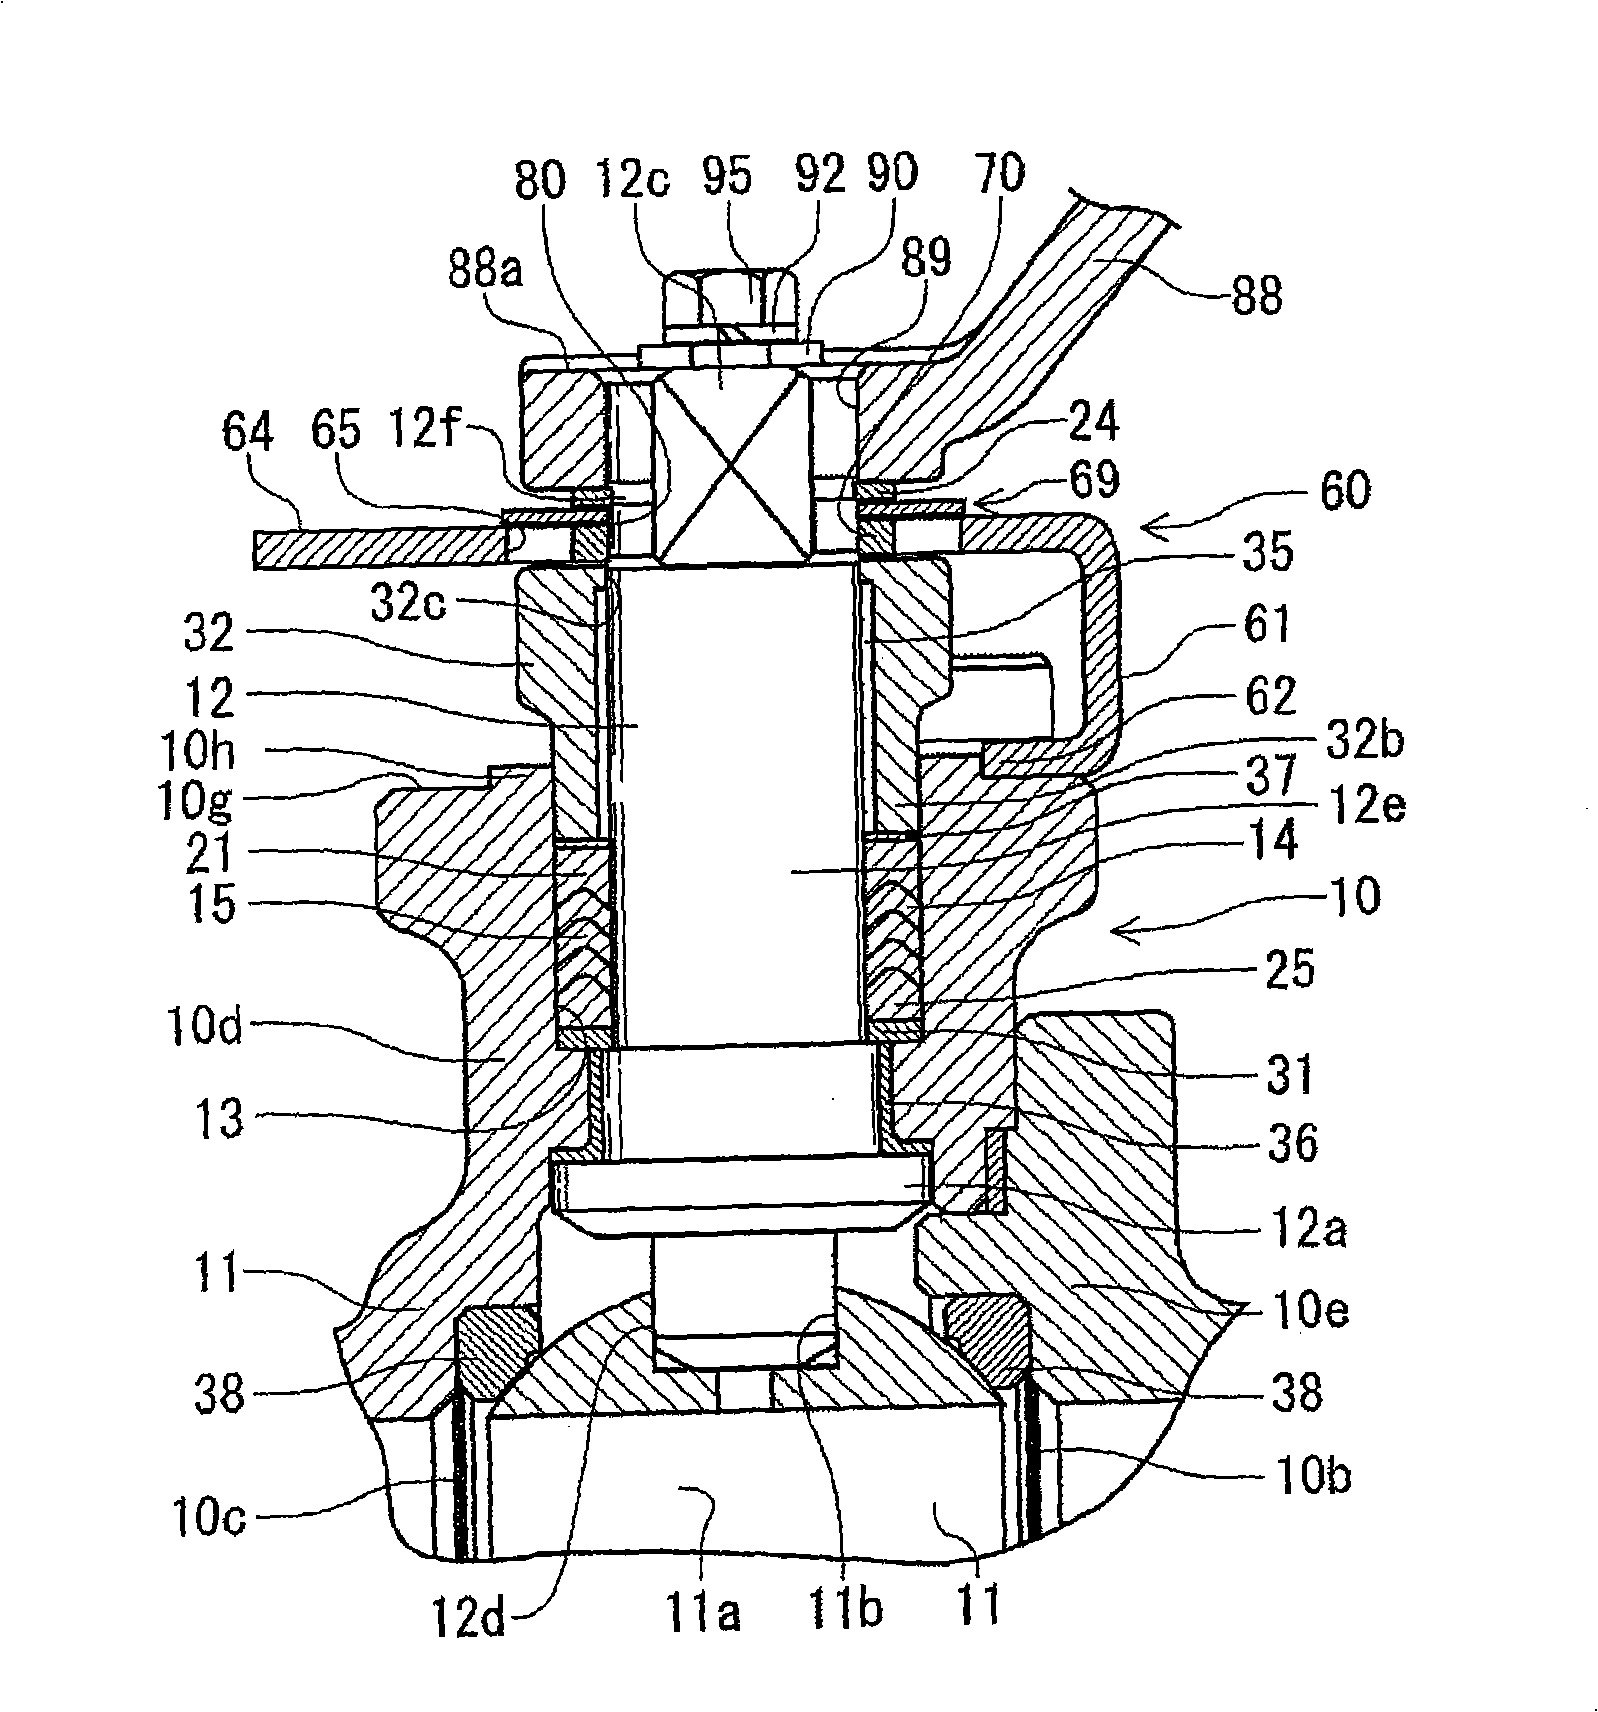 Shaft seal packing and shaft seal structure for valve